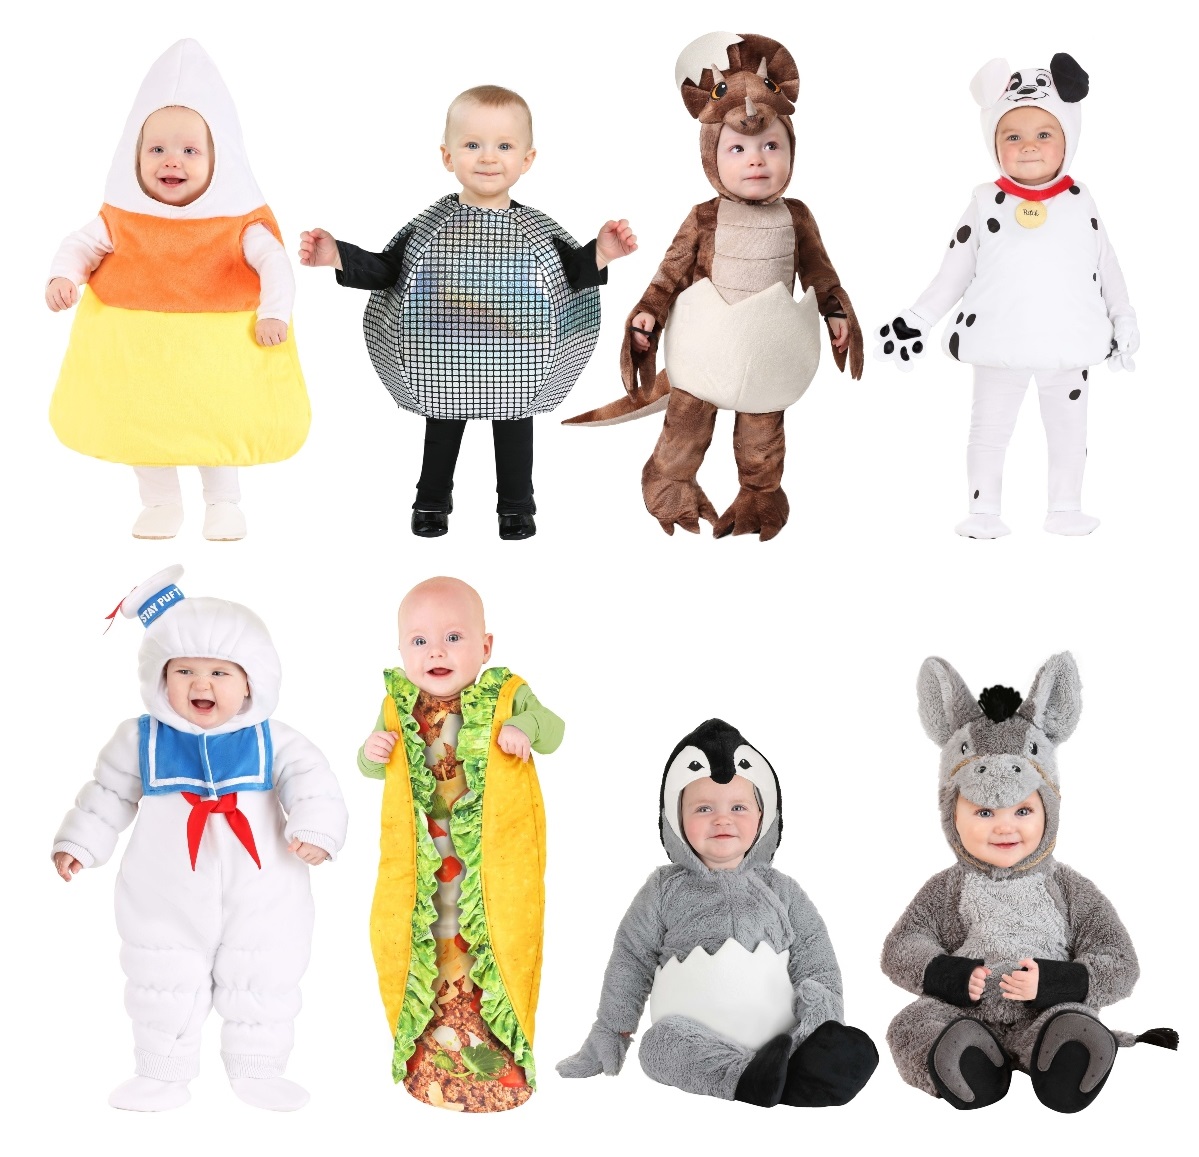 Unisex Costumes for Babies